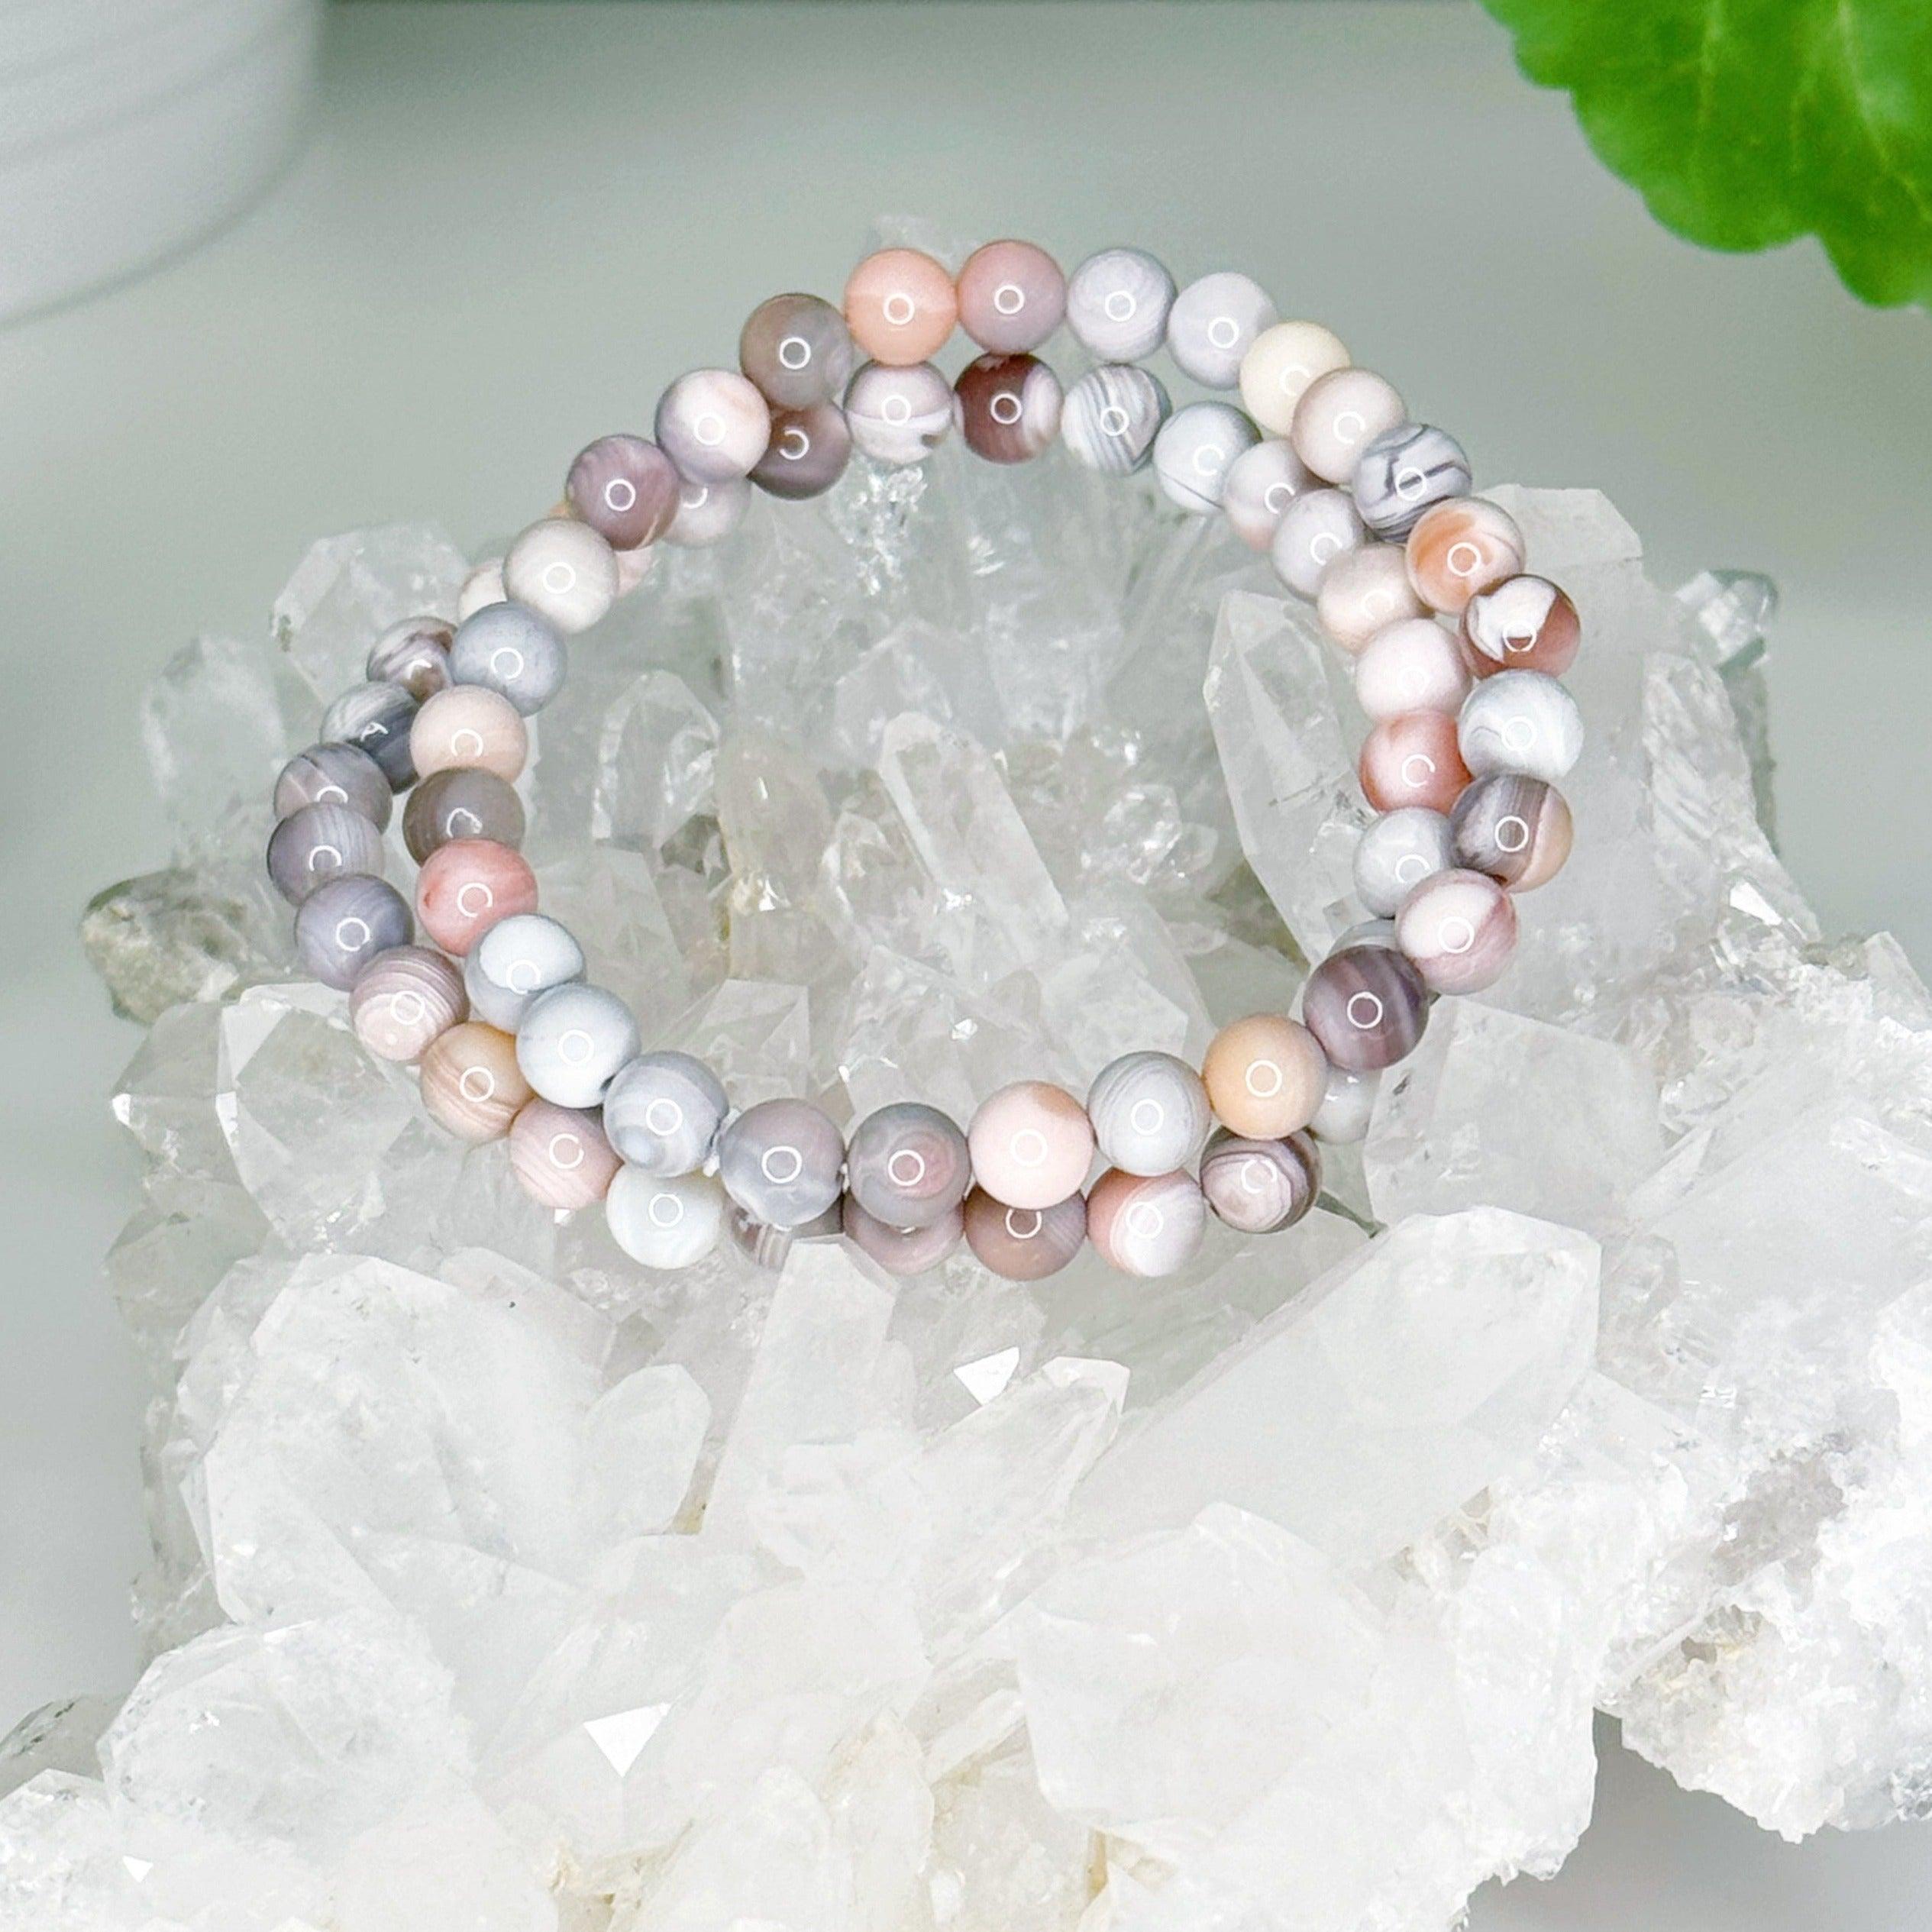 PINK BOTSWANA AGATE 6mm - HANDMADE CRYSTAL BRACELET - 6mm, agate, botswana agate, bracelet, clear/white, crystal bracelet, fire, gemini, gemini stack, grey, handmade bracelet, jewelry, mixed colors, pink, pink botswana agate, recently added, summer solstice, valentines bracelets, valentines vibes, Wearable - The Mineral Maven